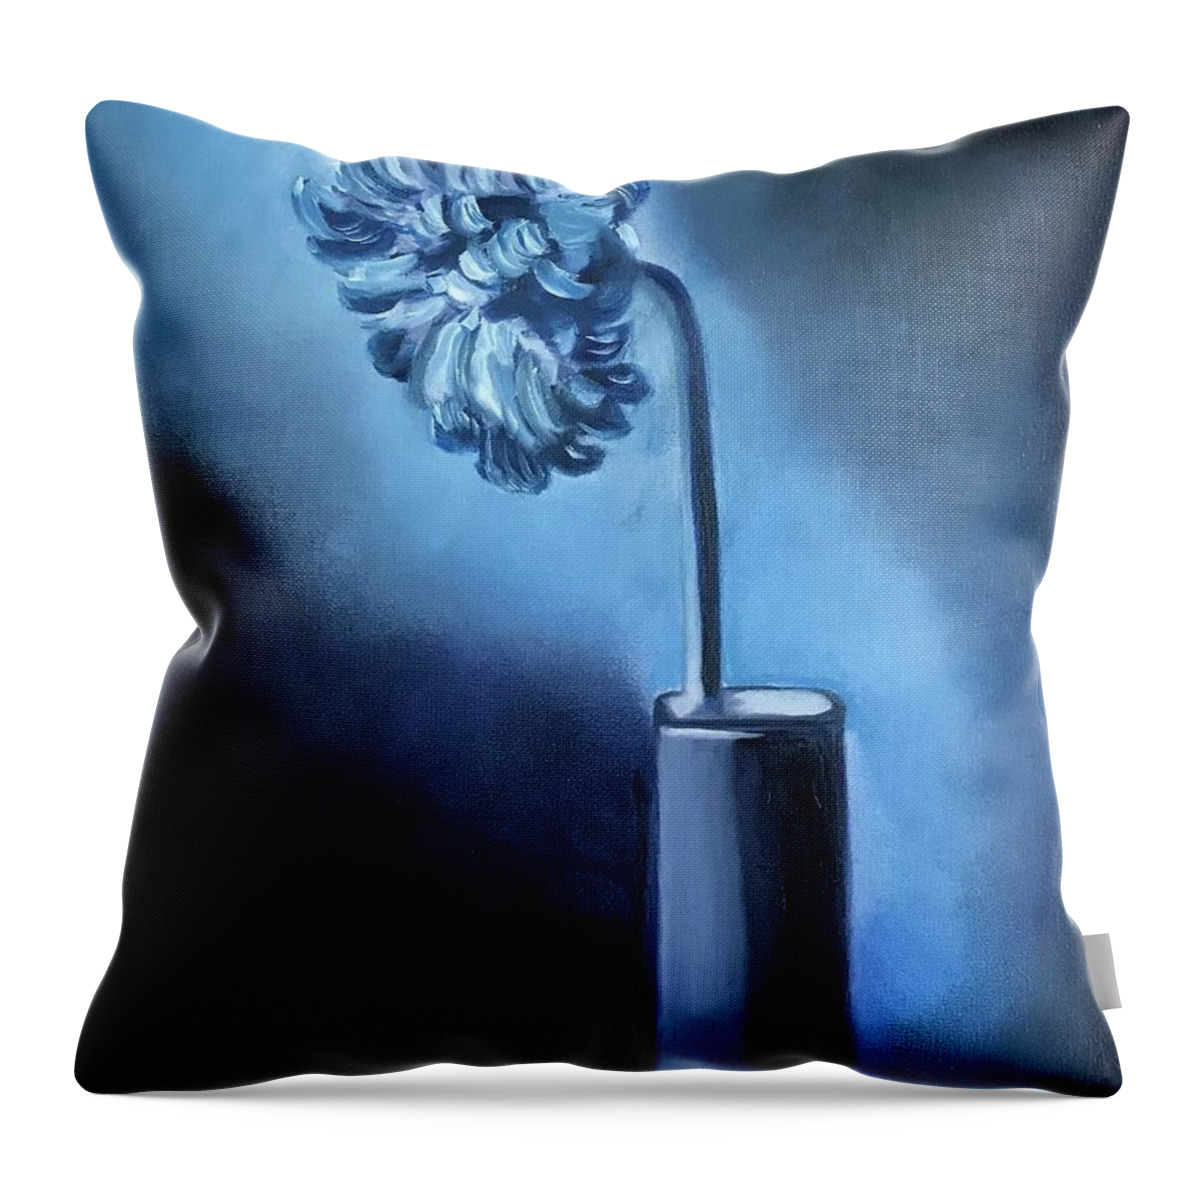 Original Art Work Throw Pillow featuring the painting Original - Loving the Blues by Theresa Honeycheck